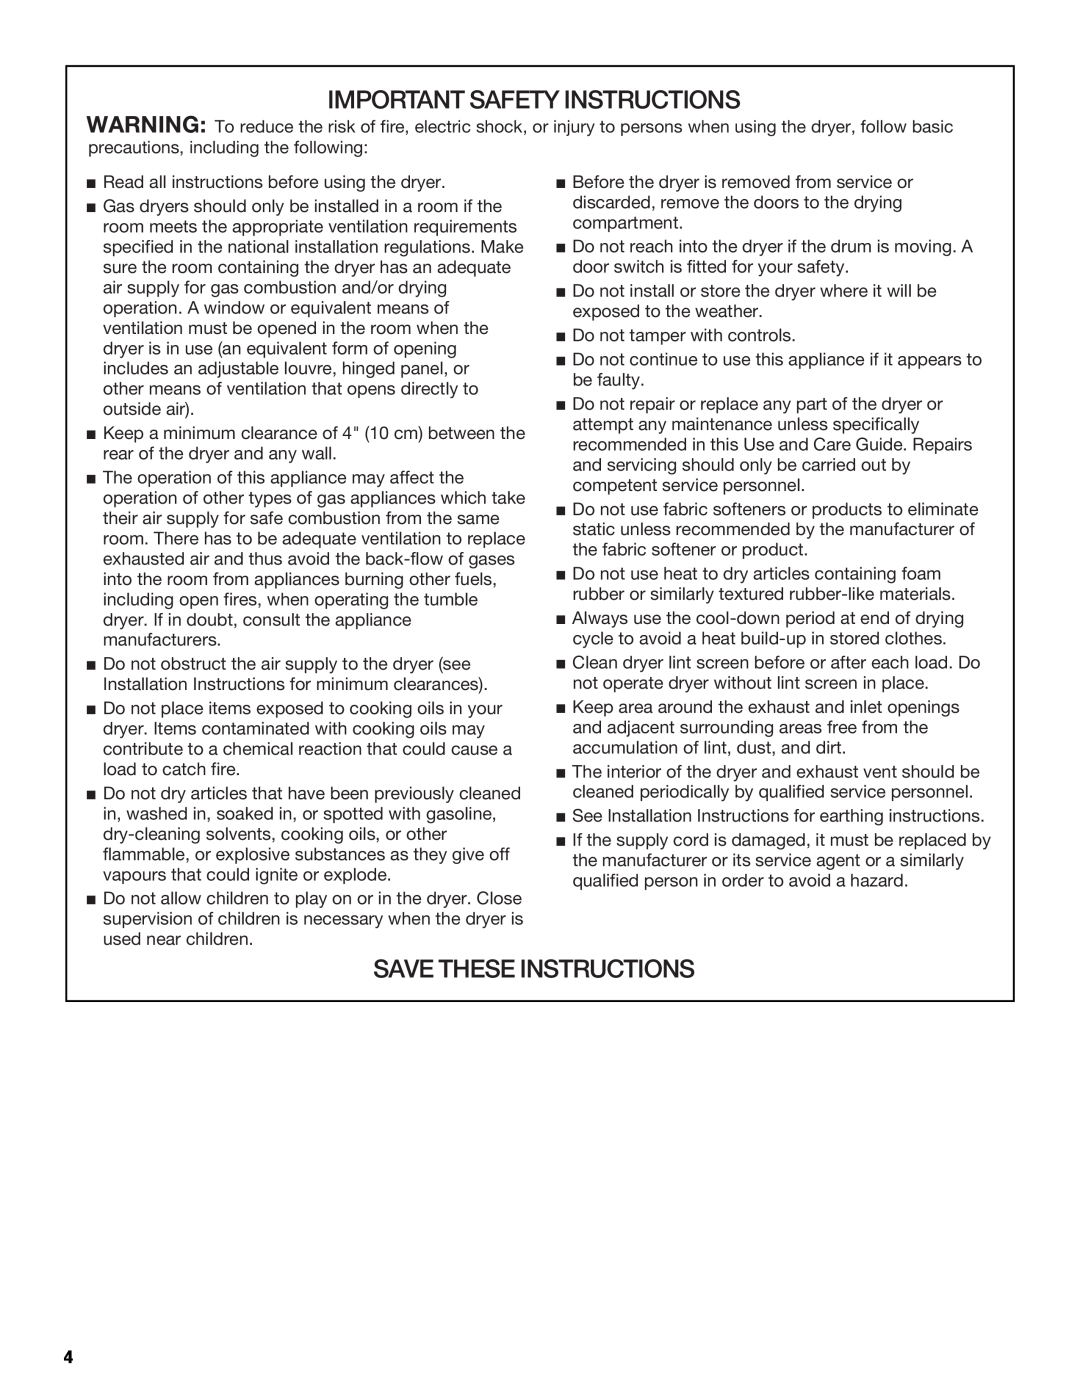 Whirlpool Top-Load Dryer manual Important Safety Instructions, Save These Instructions 